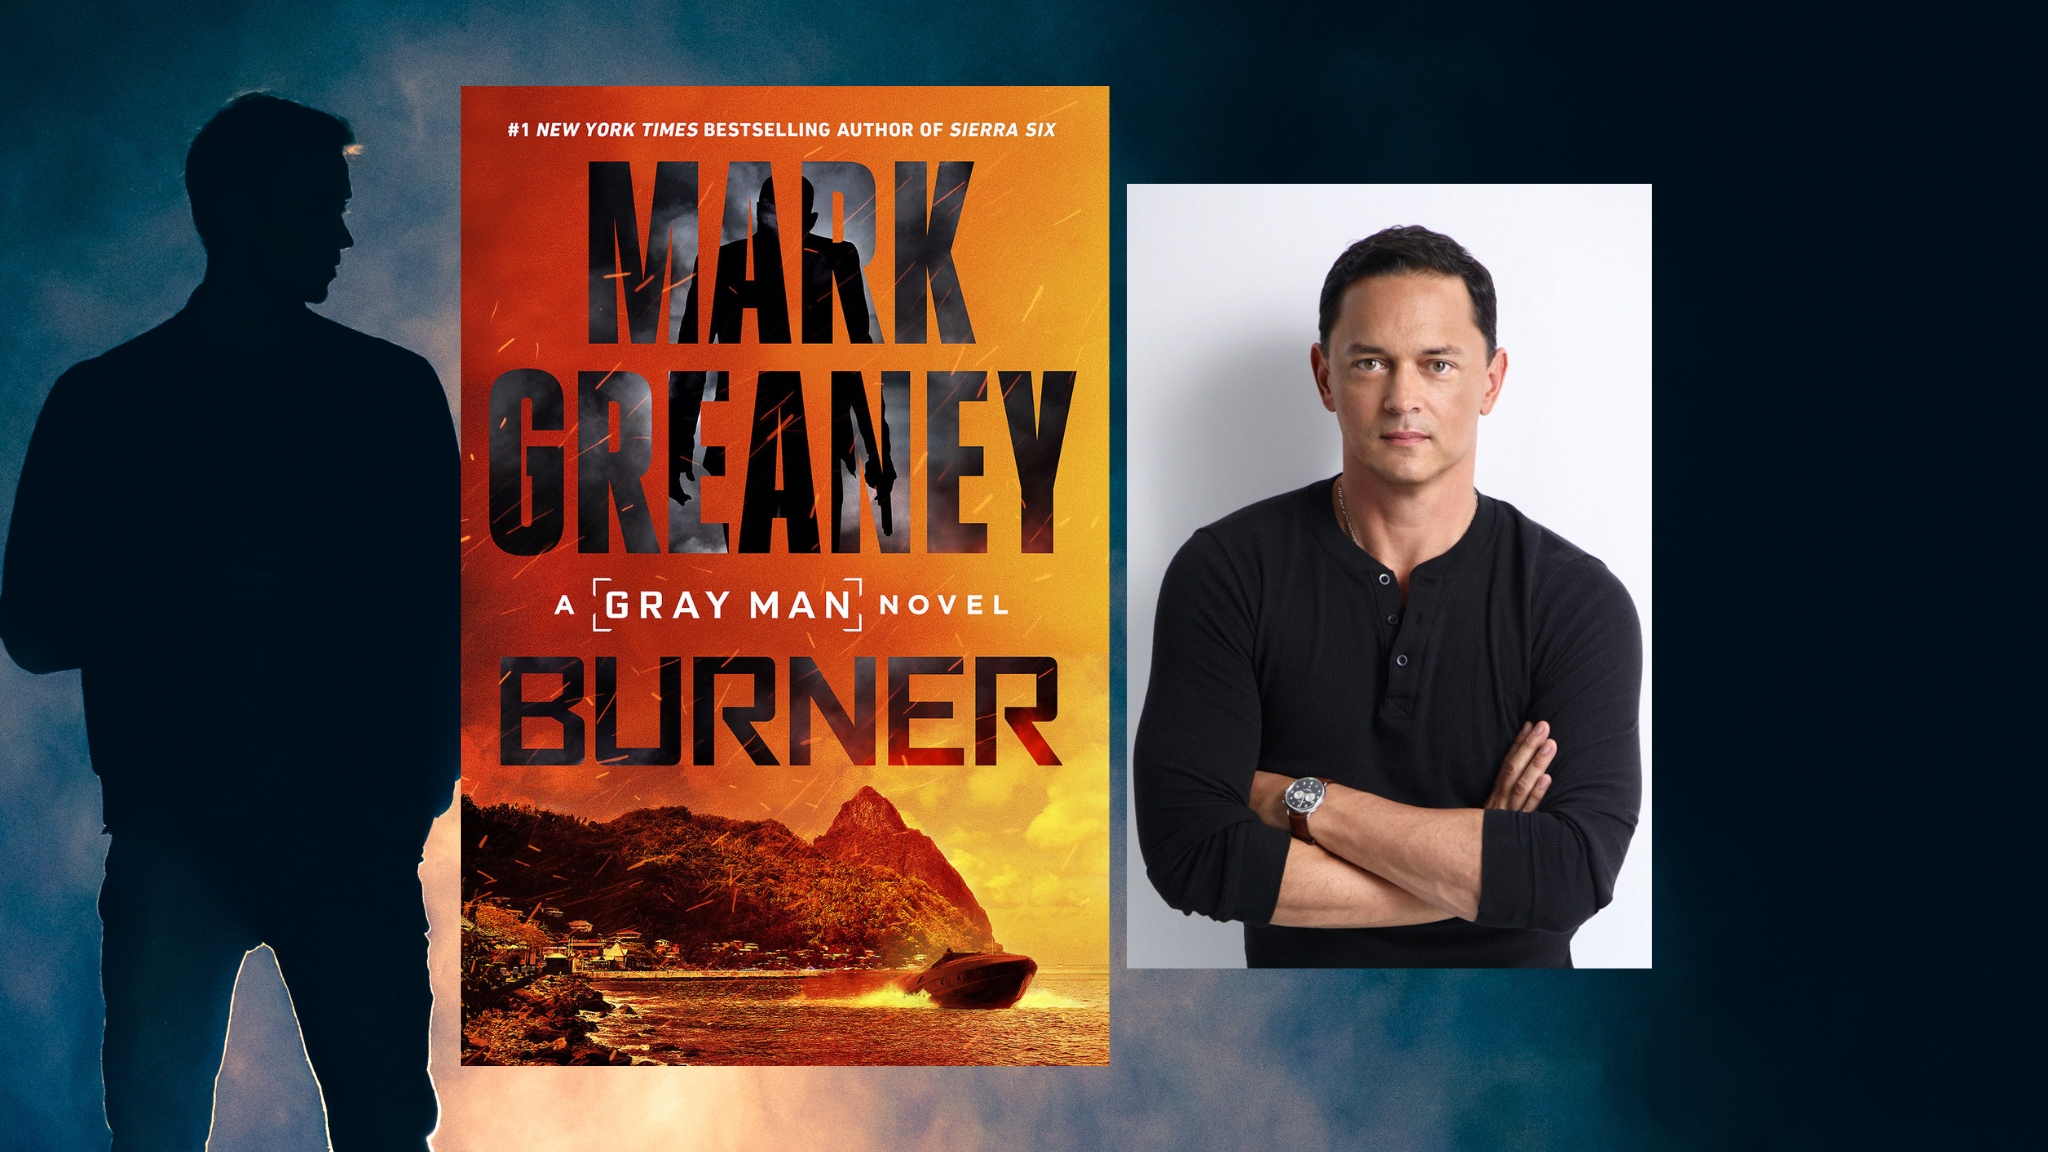 Fans of Netflix's “The Gray Man” Will Love this Next Assassin Thriller from  Mark Greaney